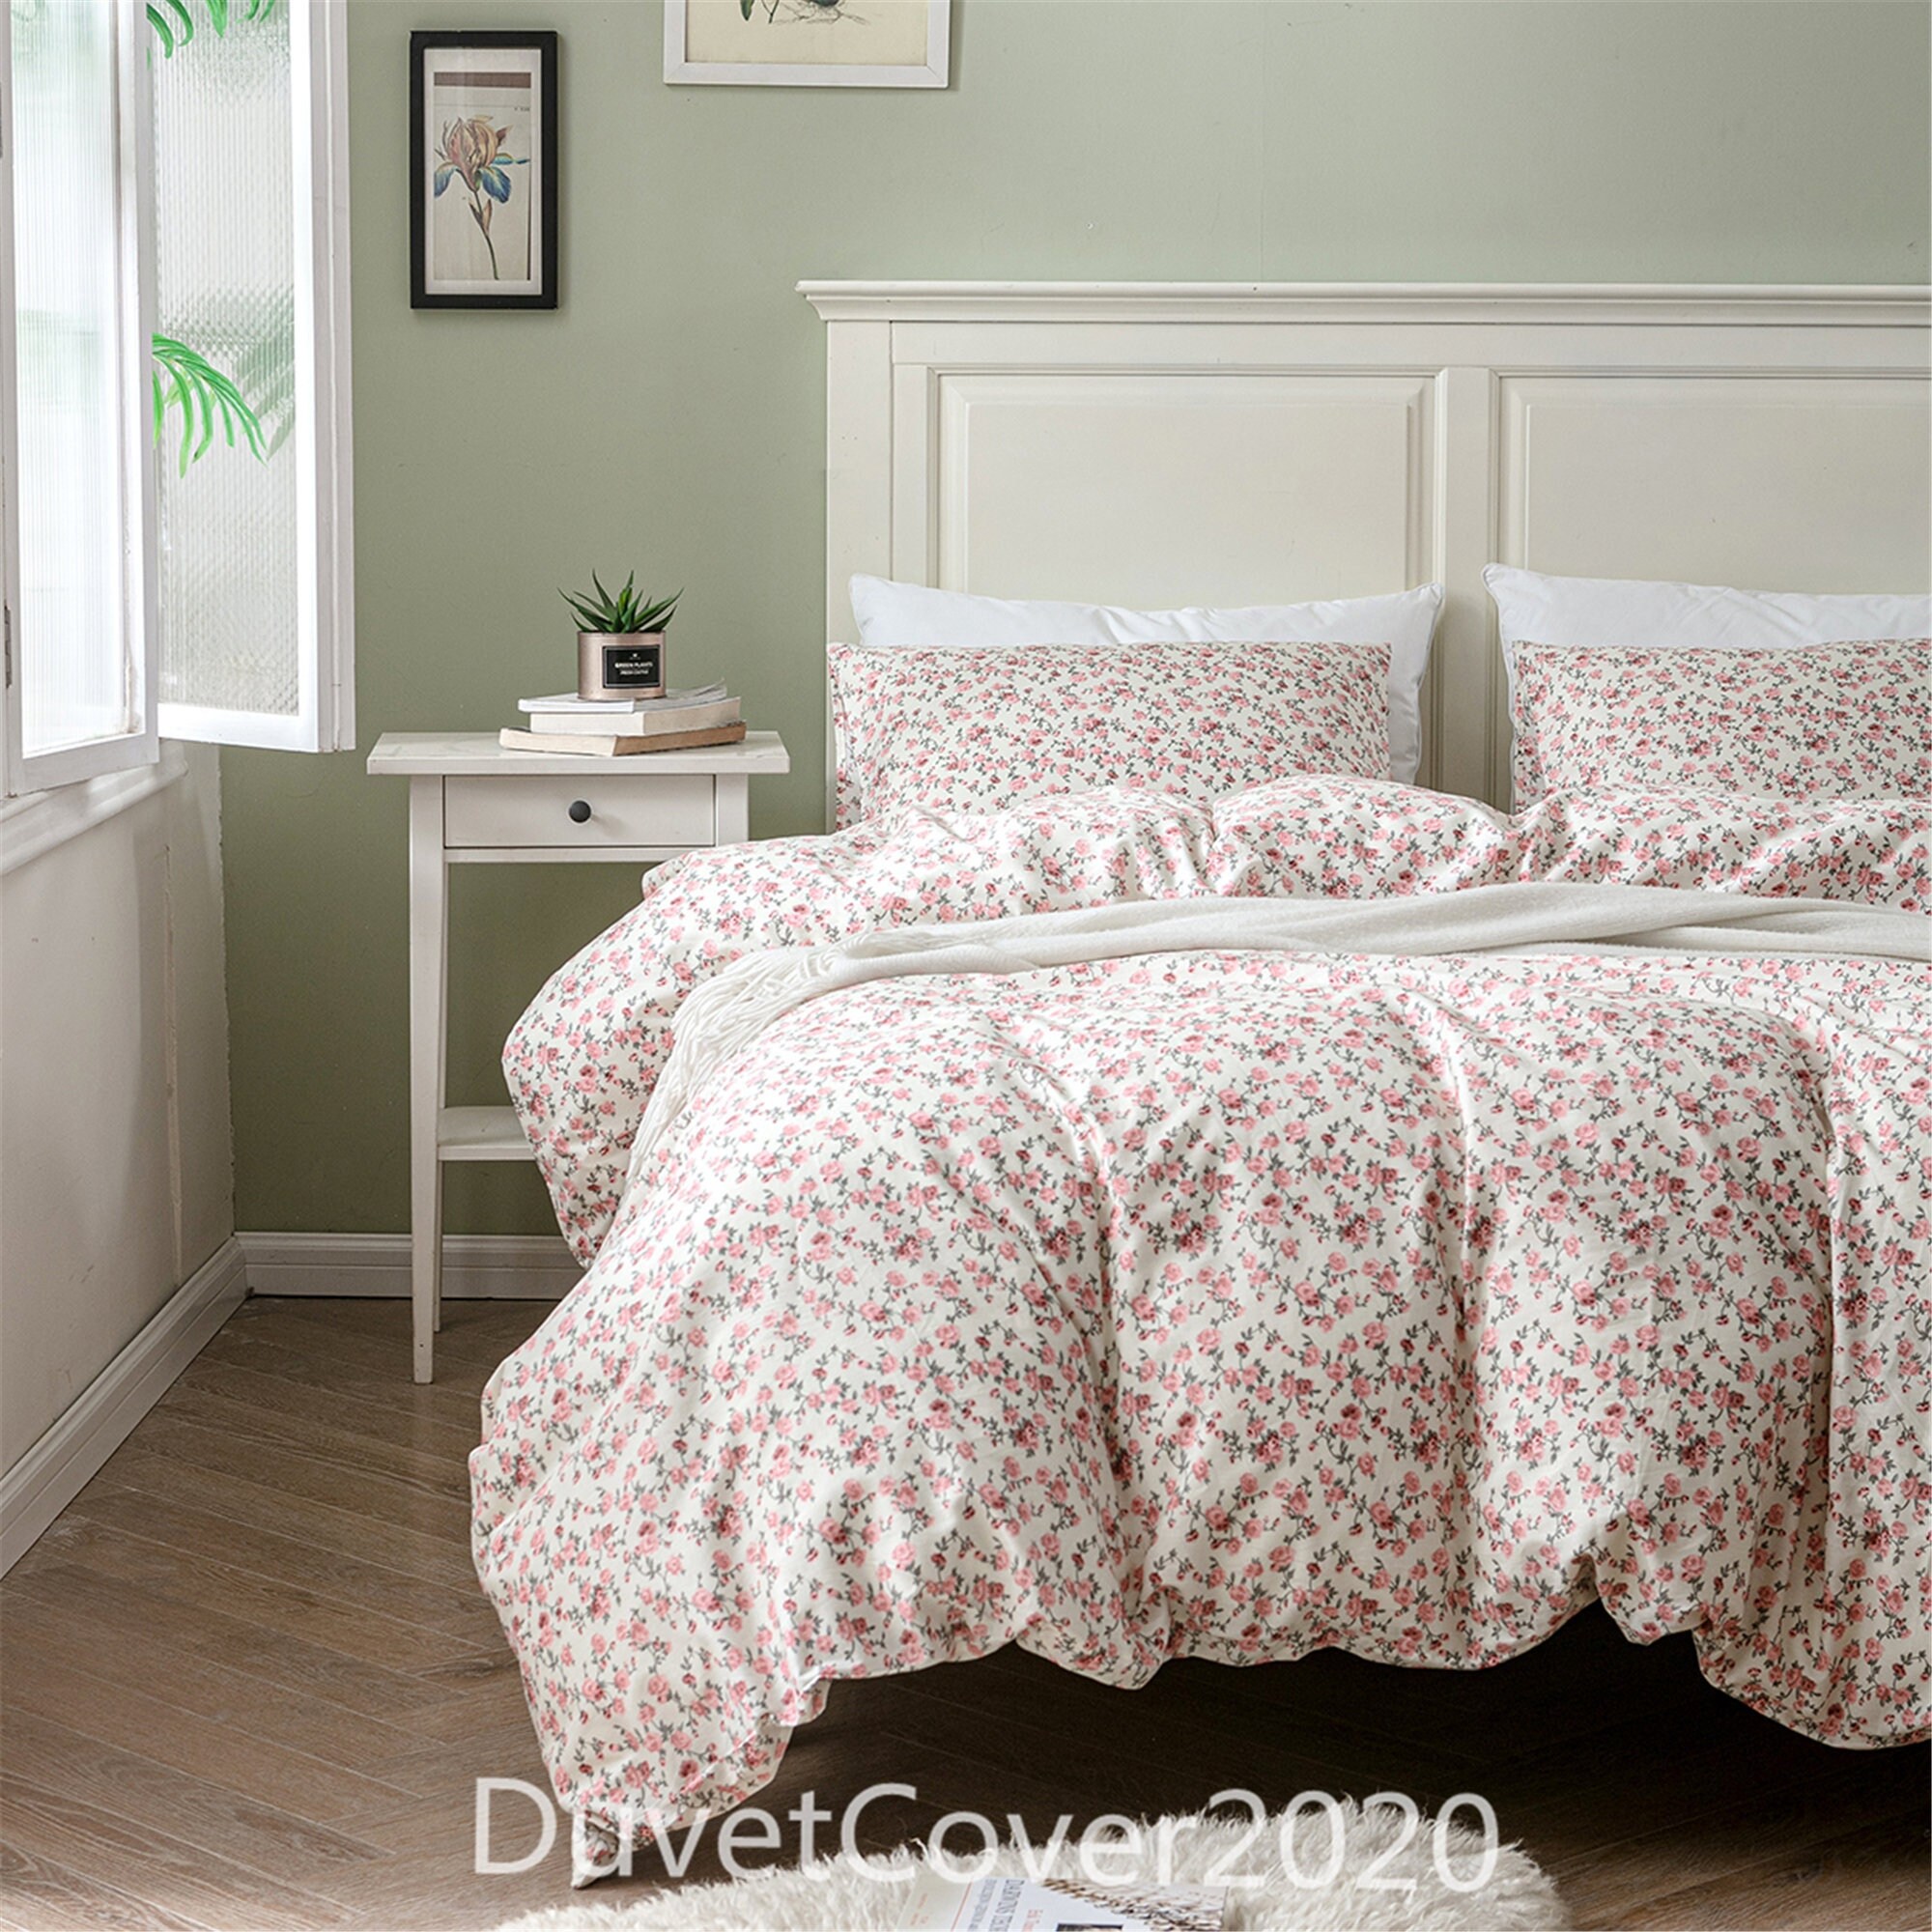 Cover 4 Pillow cases & Fitted Sheet Beautiful Pink Floral Double Bed Duvet Set 